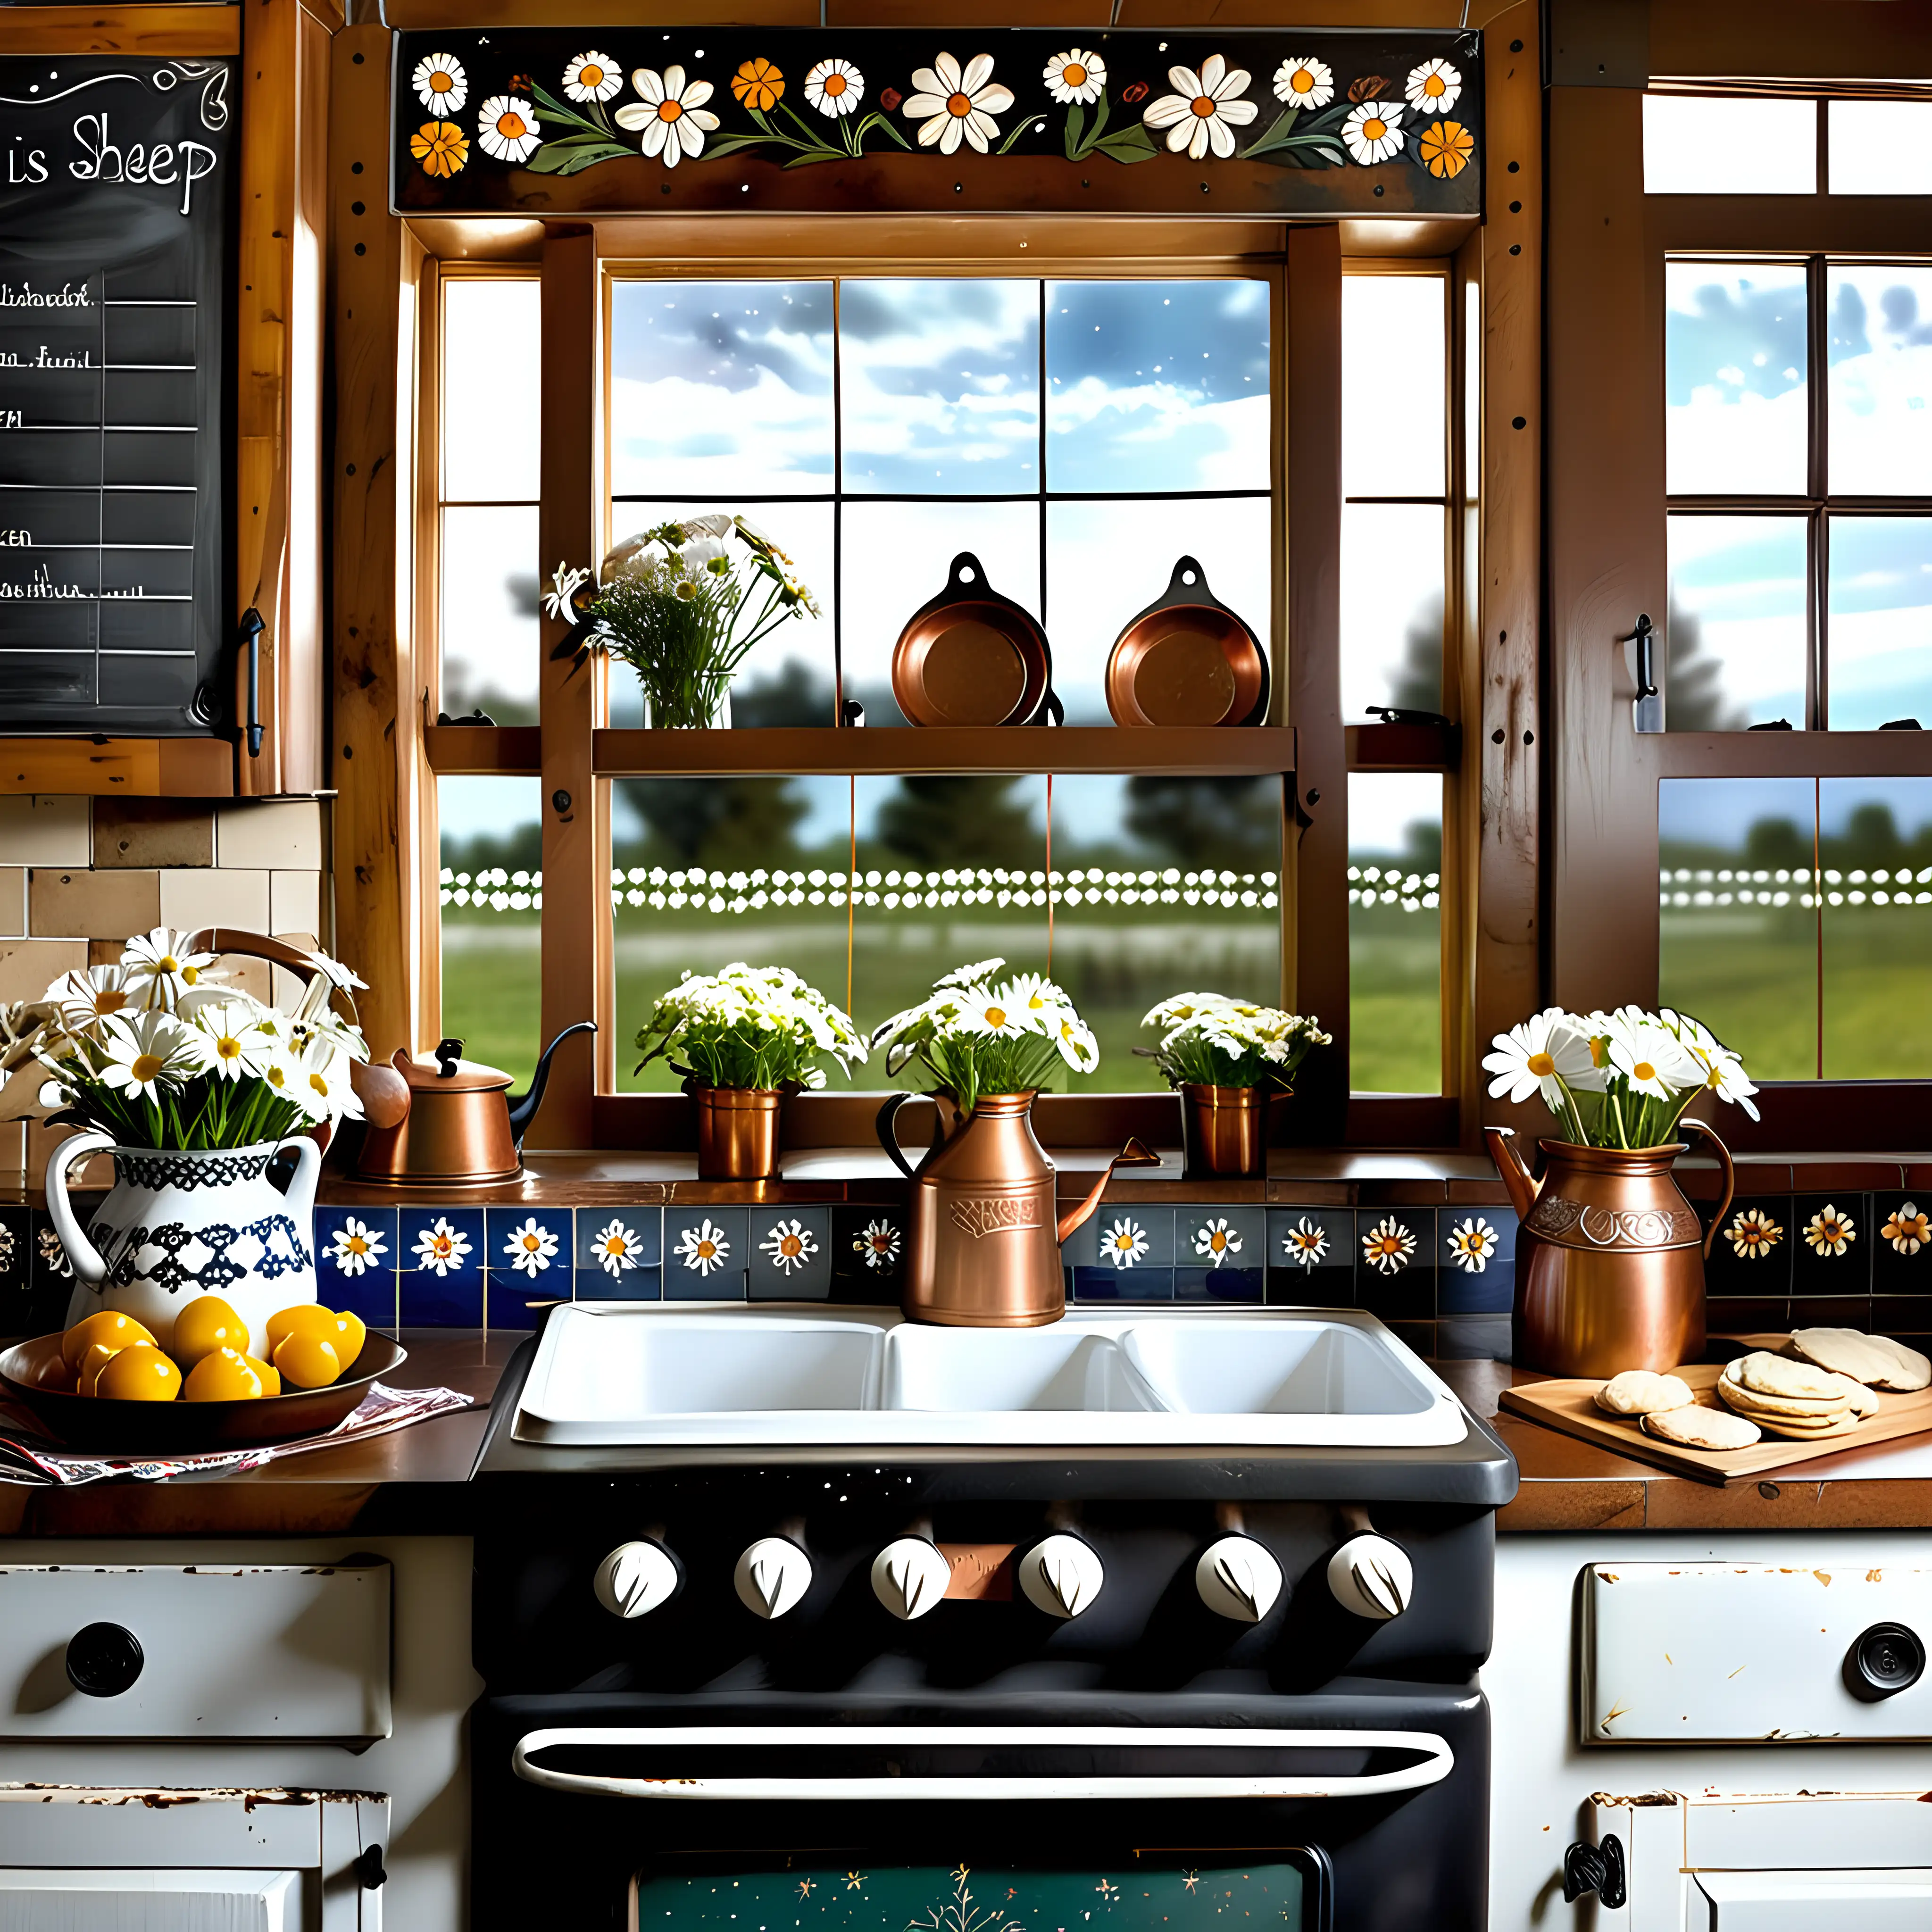 Envision a warm, rustic kitchen . The kitchen table is a solid wood farmhouse style, with a vase of fresh daisies in the center. Hand-painted tiles create a backsplash behind the stove, and a window above the sink offers a view of the starry night sky. Copper pots hang from a rack above, and a chalkboard menu lists comforting meals. A small, sheep-themed cookie jar sits on the countertop, adding a touch of whimsy to the heart of the home